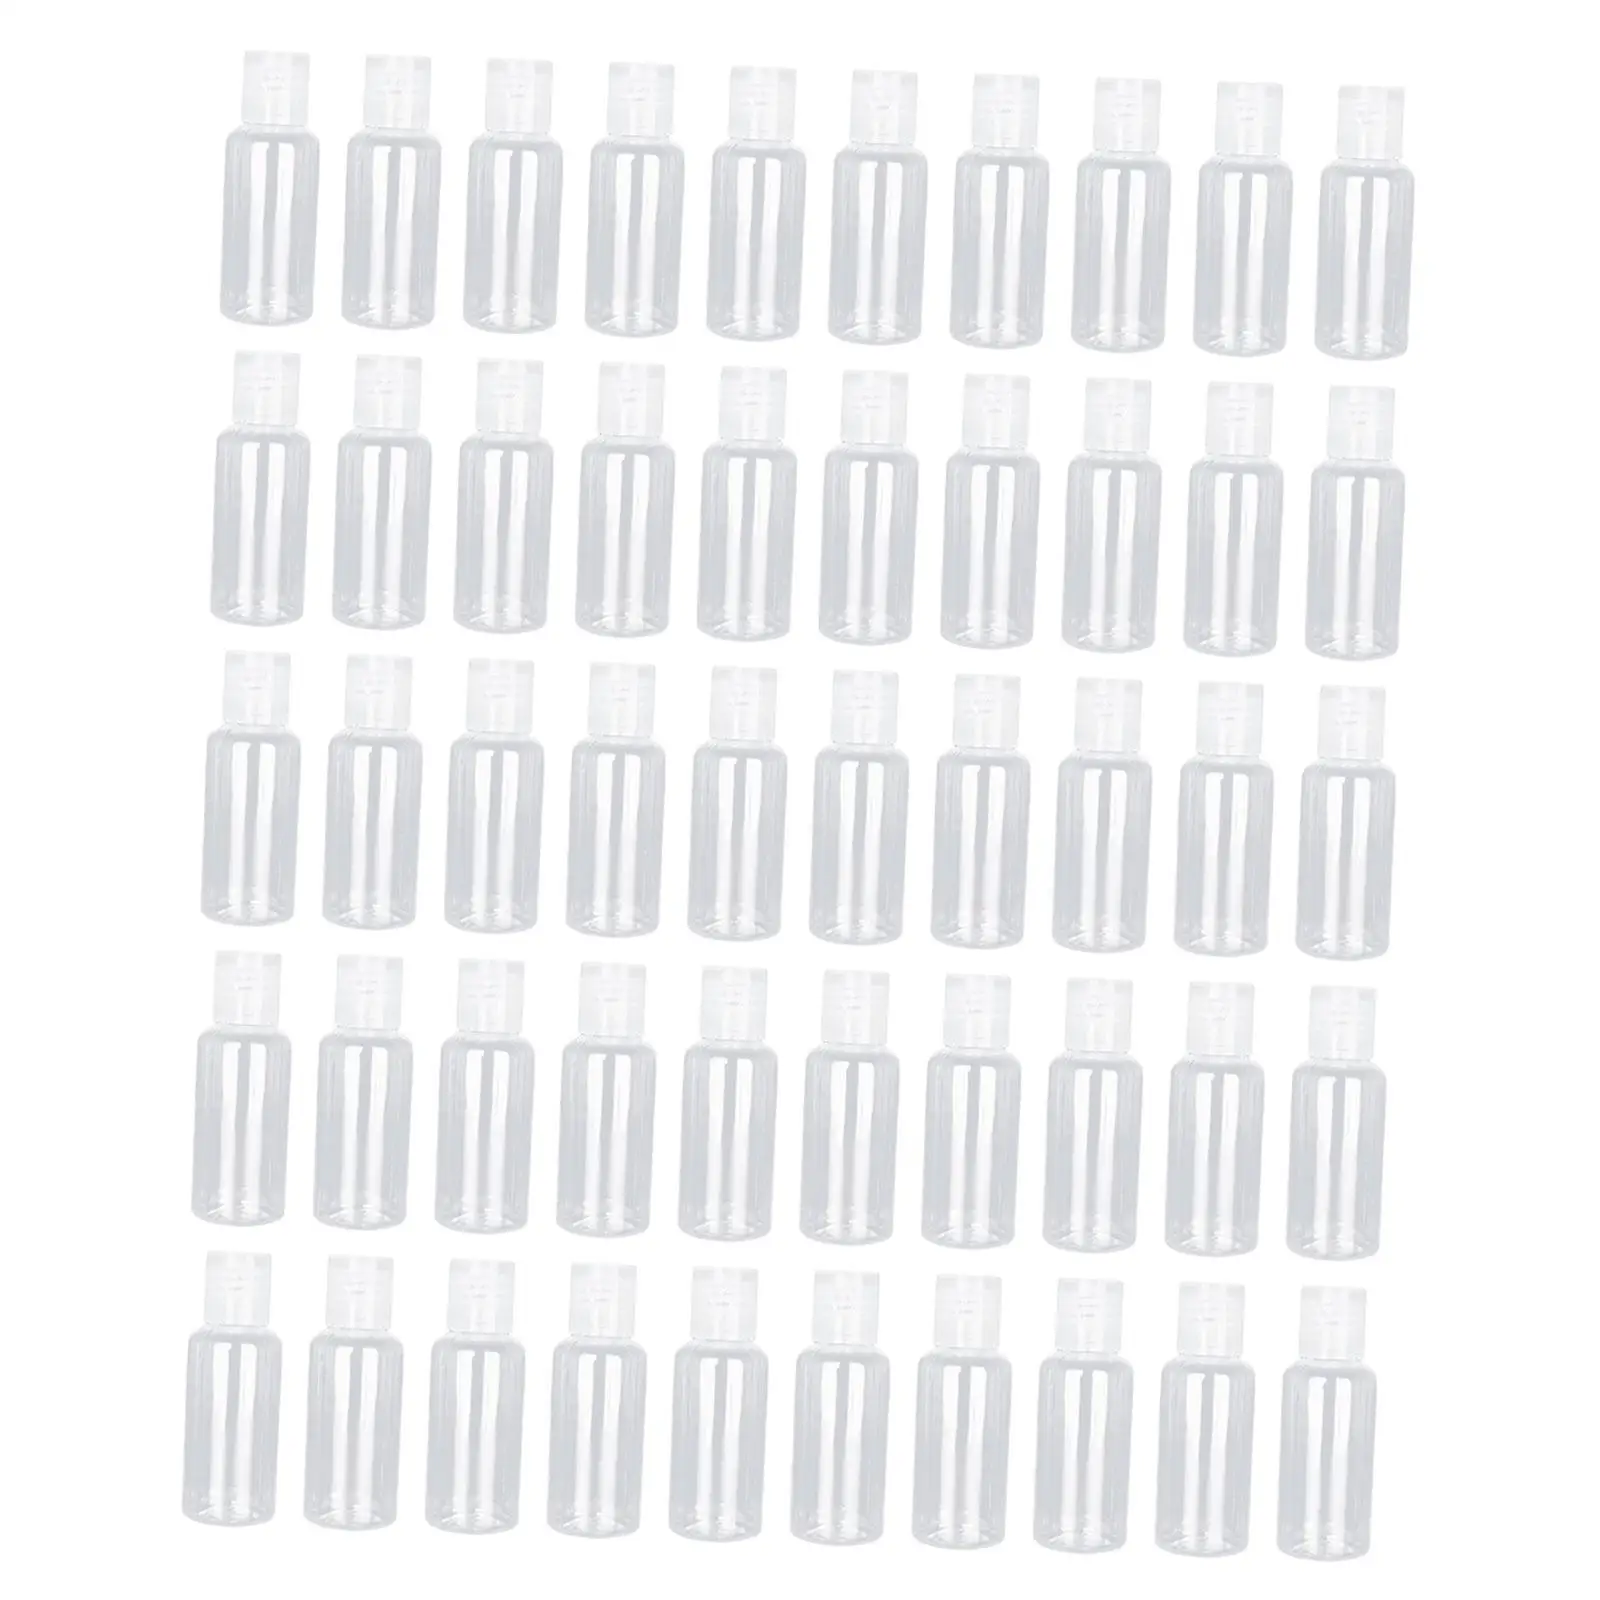 50x Cosmetic Bottle Empty Portable Travel Size Clear with Lid Empty Bottles